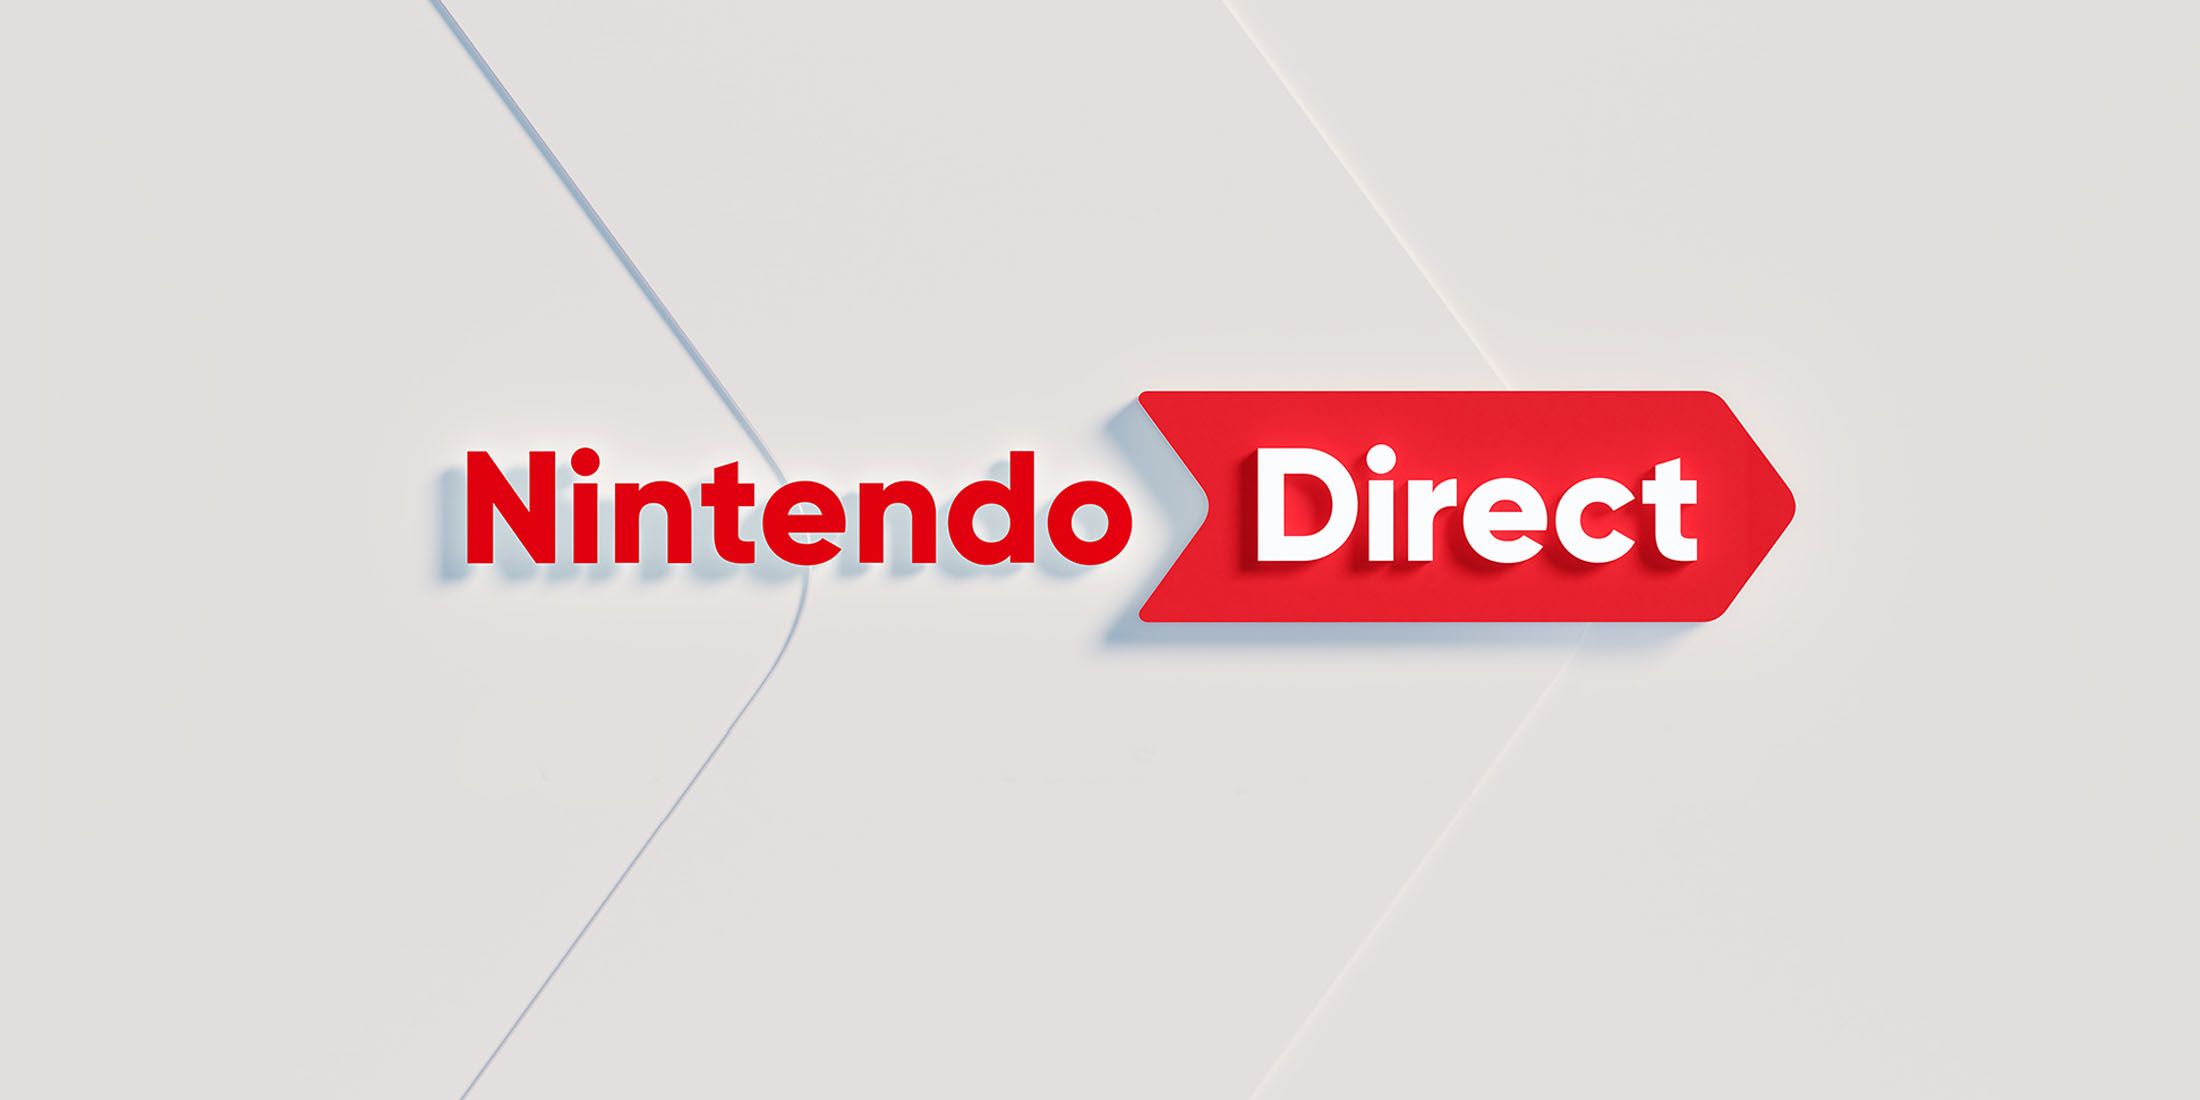 A Nintendo Direct Logo set against an off-white background.